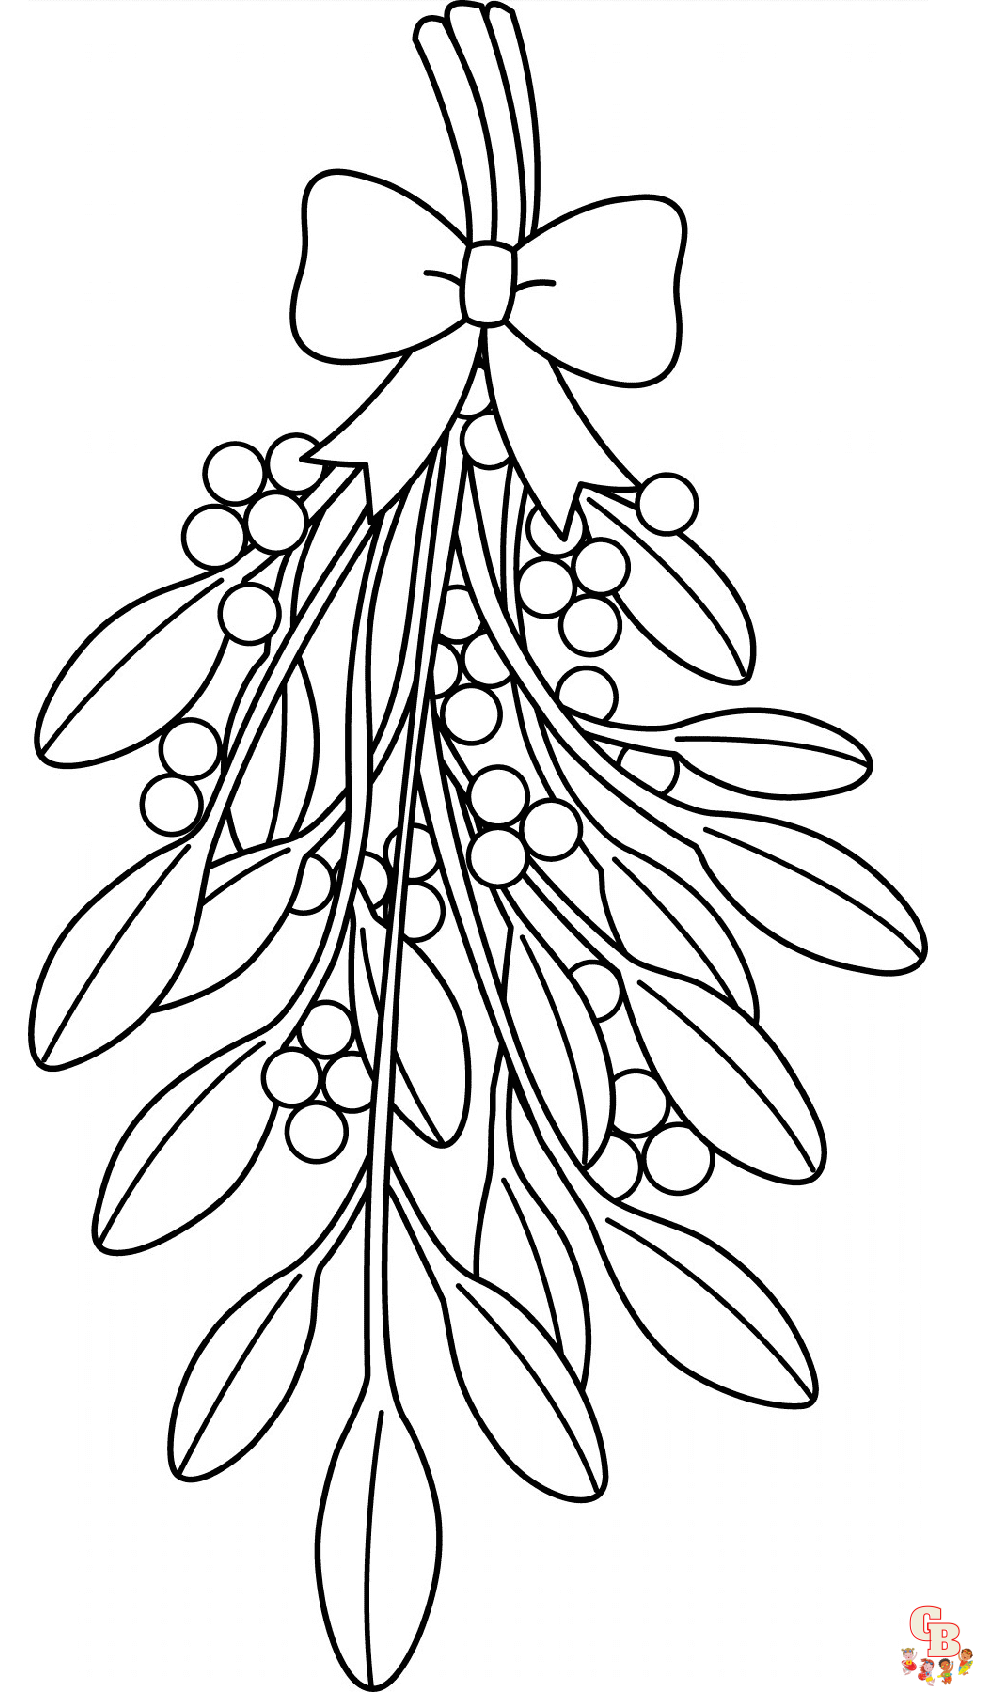 Mistletoe coloring pages free